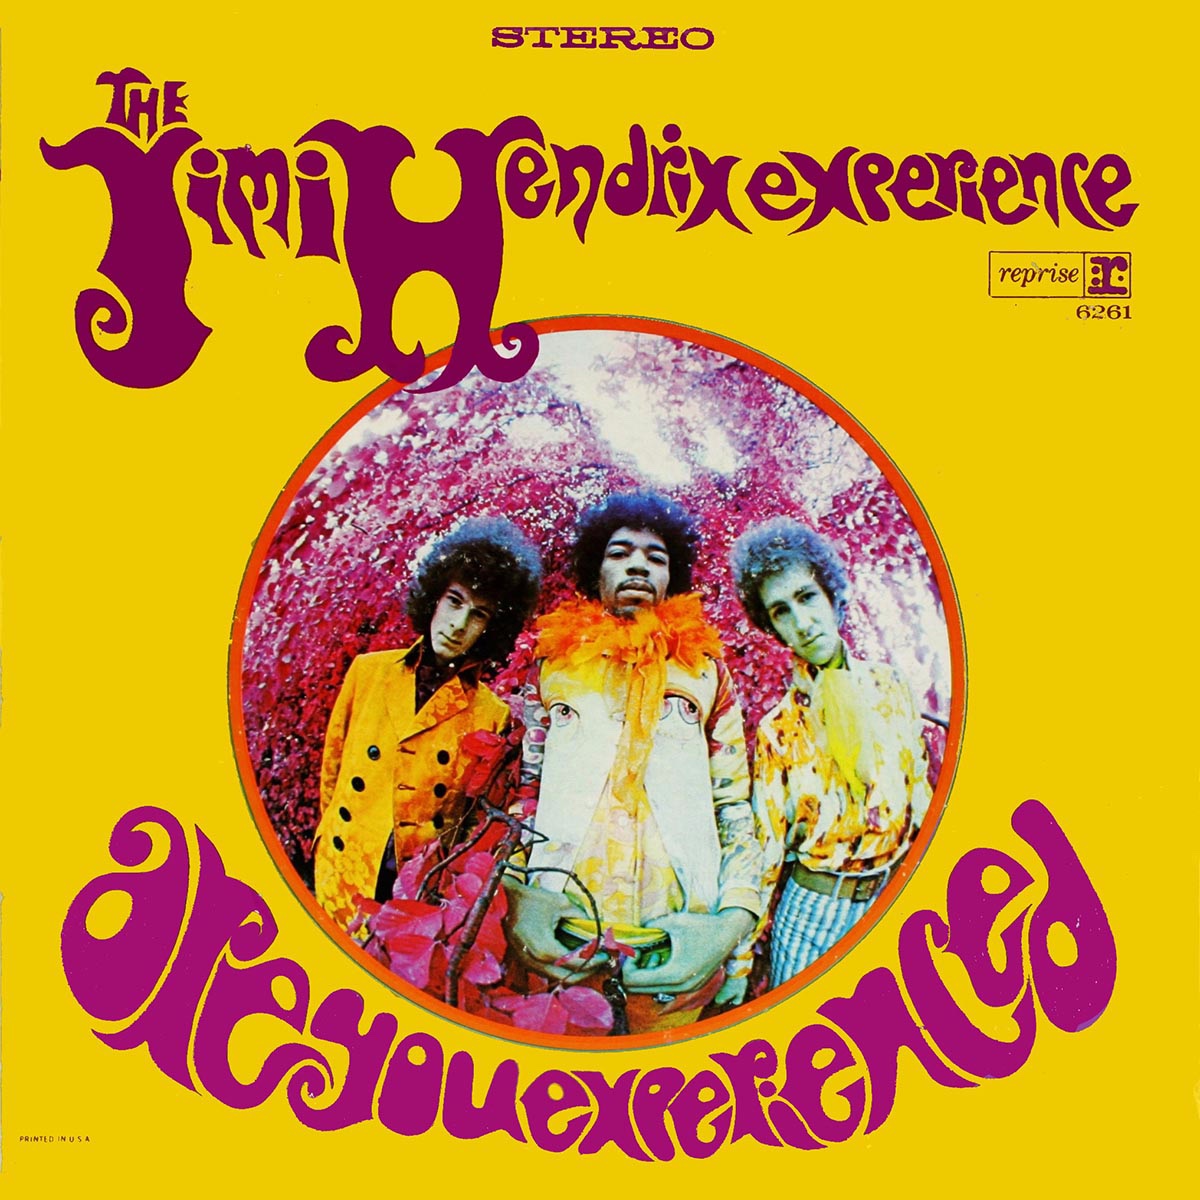 Are_You_Experienced_-_US_cover-edit.jpg.75106e073b3682beb6822459783af859.jpg